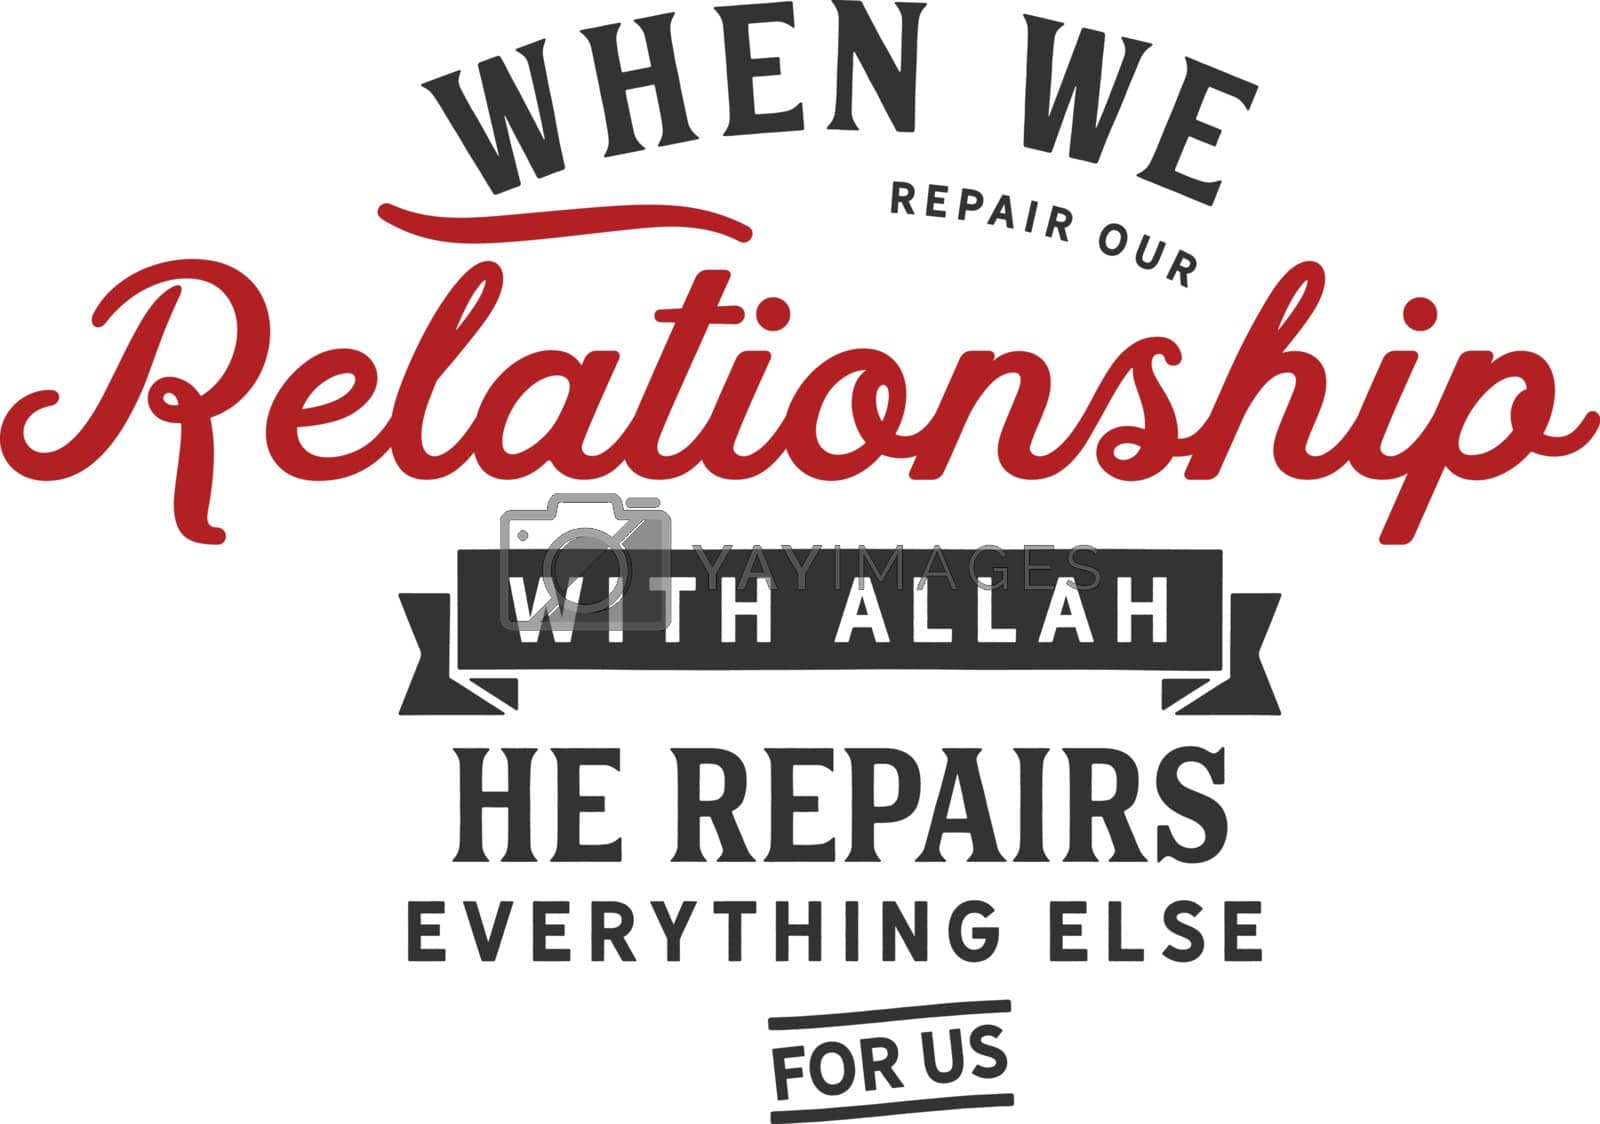 Royalty free image of our relationship with Allah by teguh_jam@yahoo.com